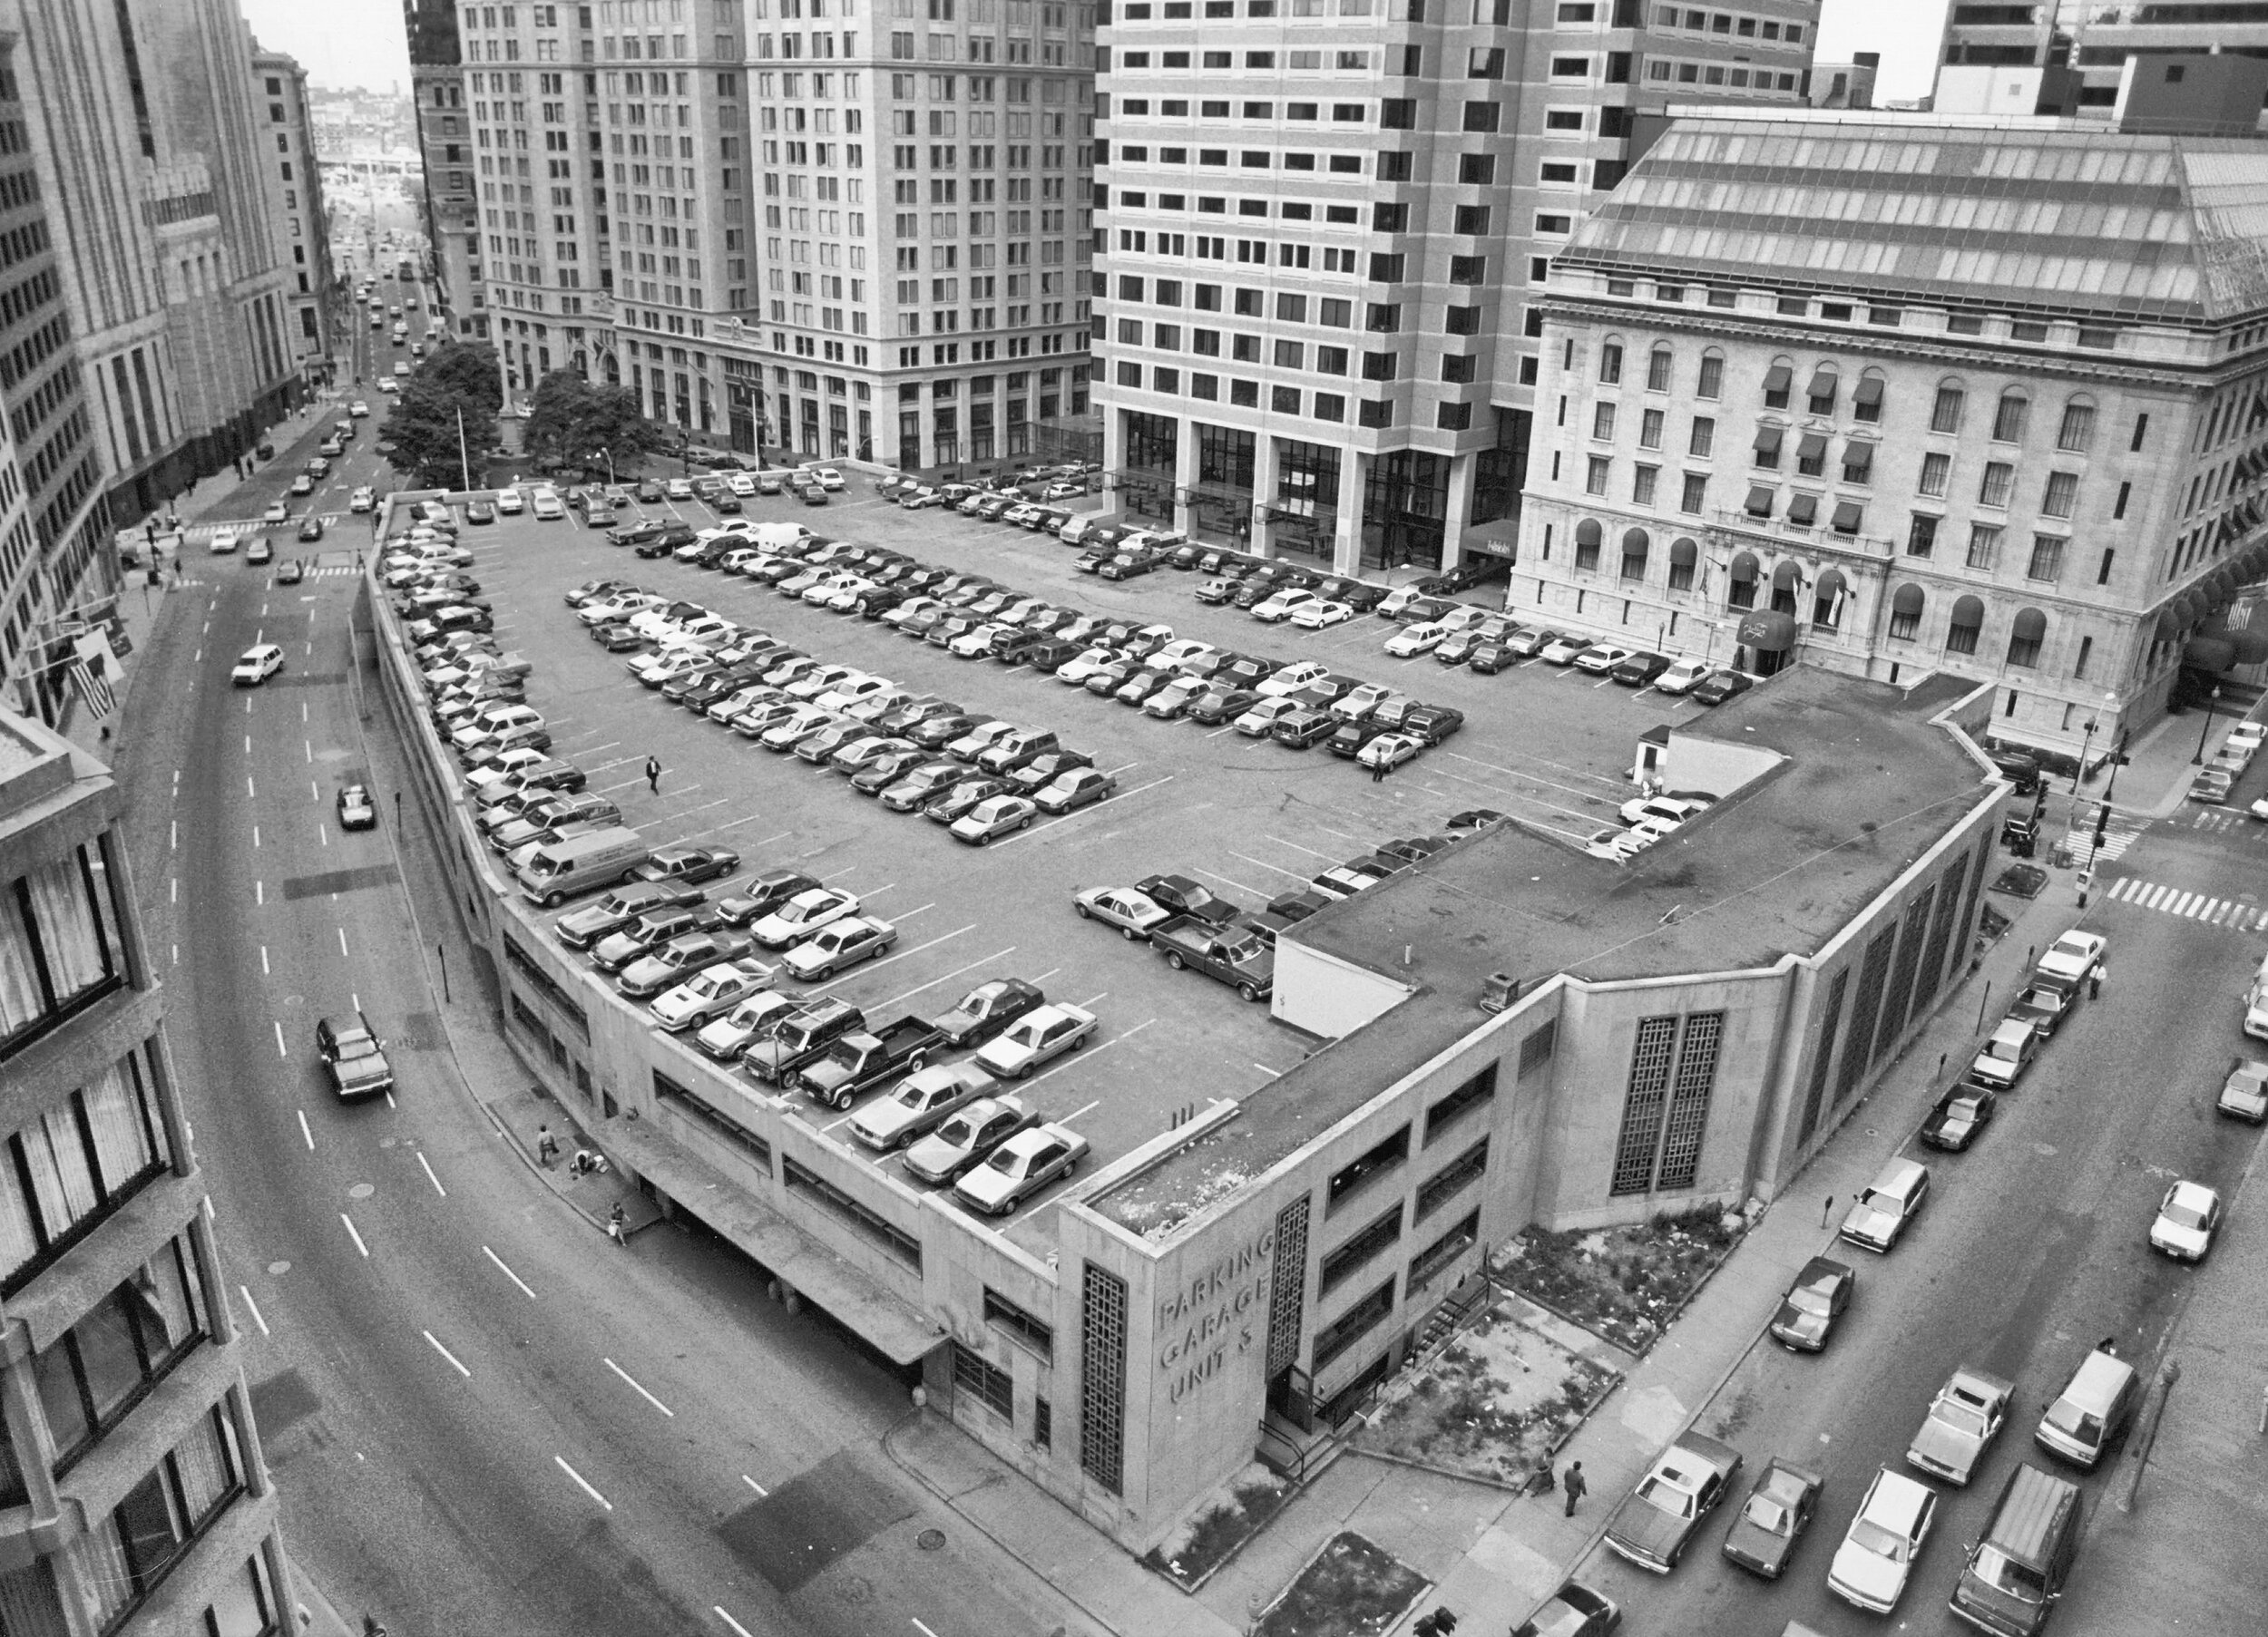  “Before” view of Post Office Square 